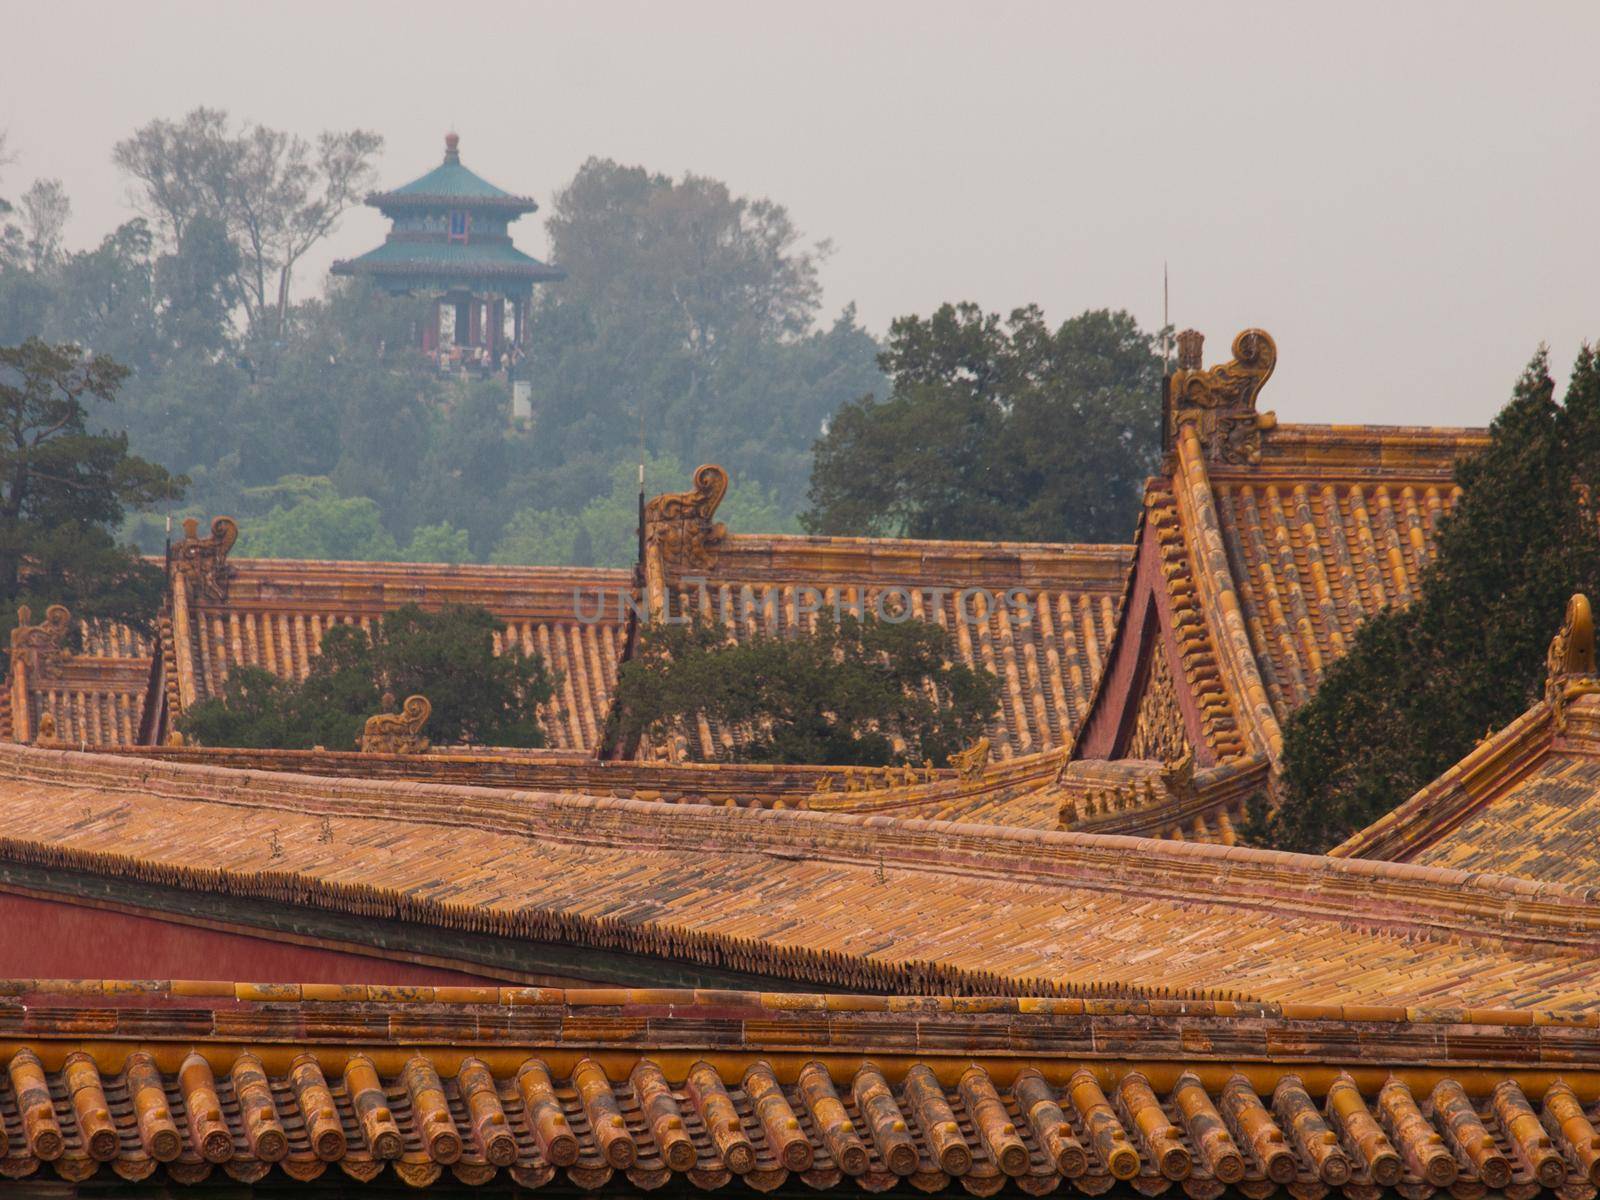 Facade and roofs details, Forbidden City in Beijing. Imperial palace in China.